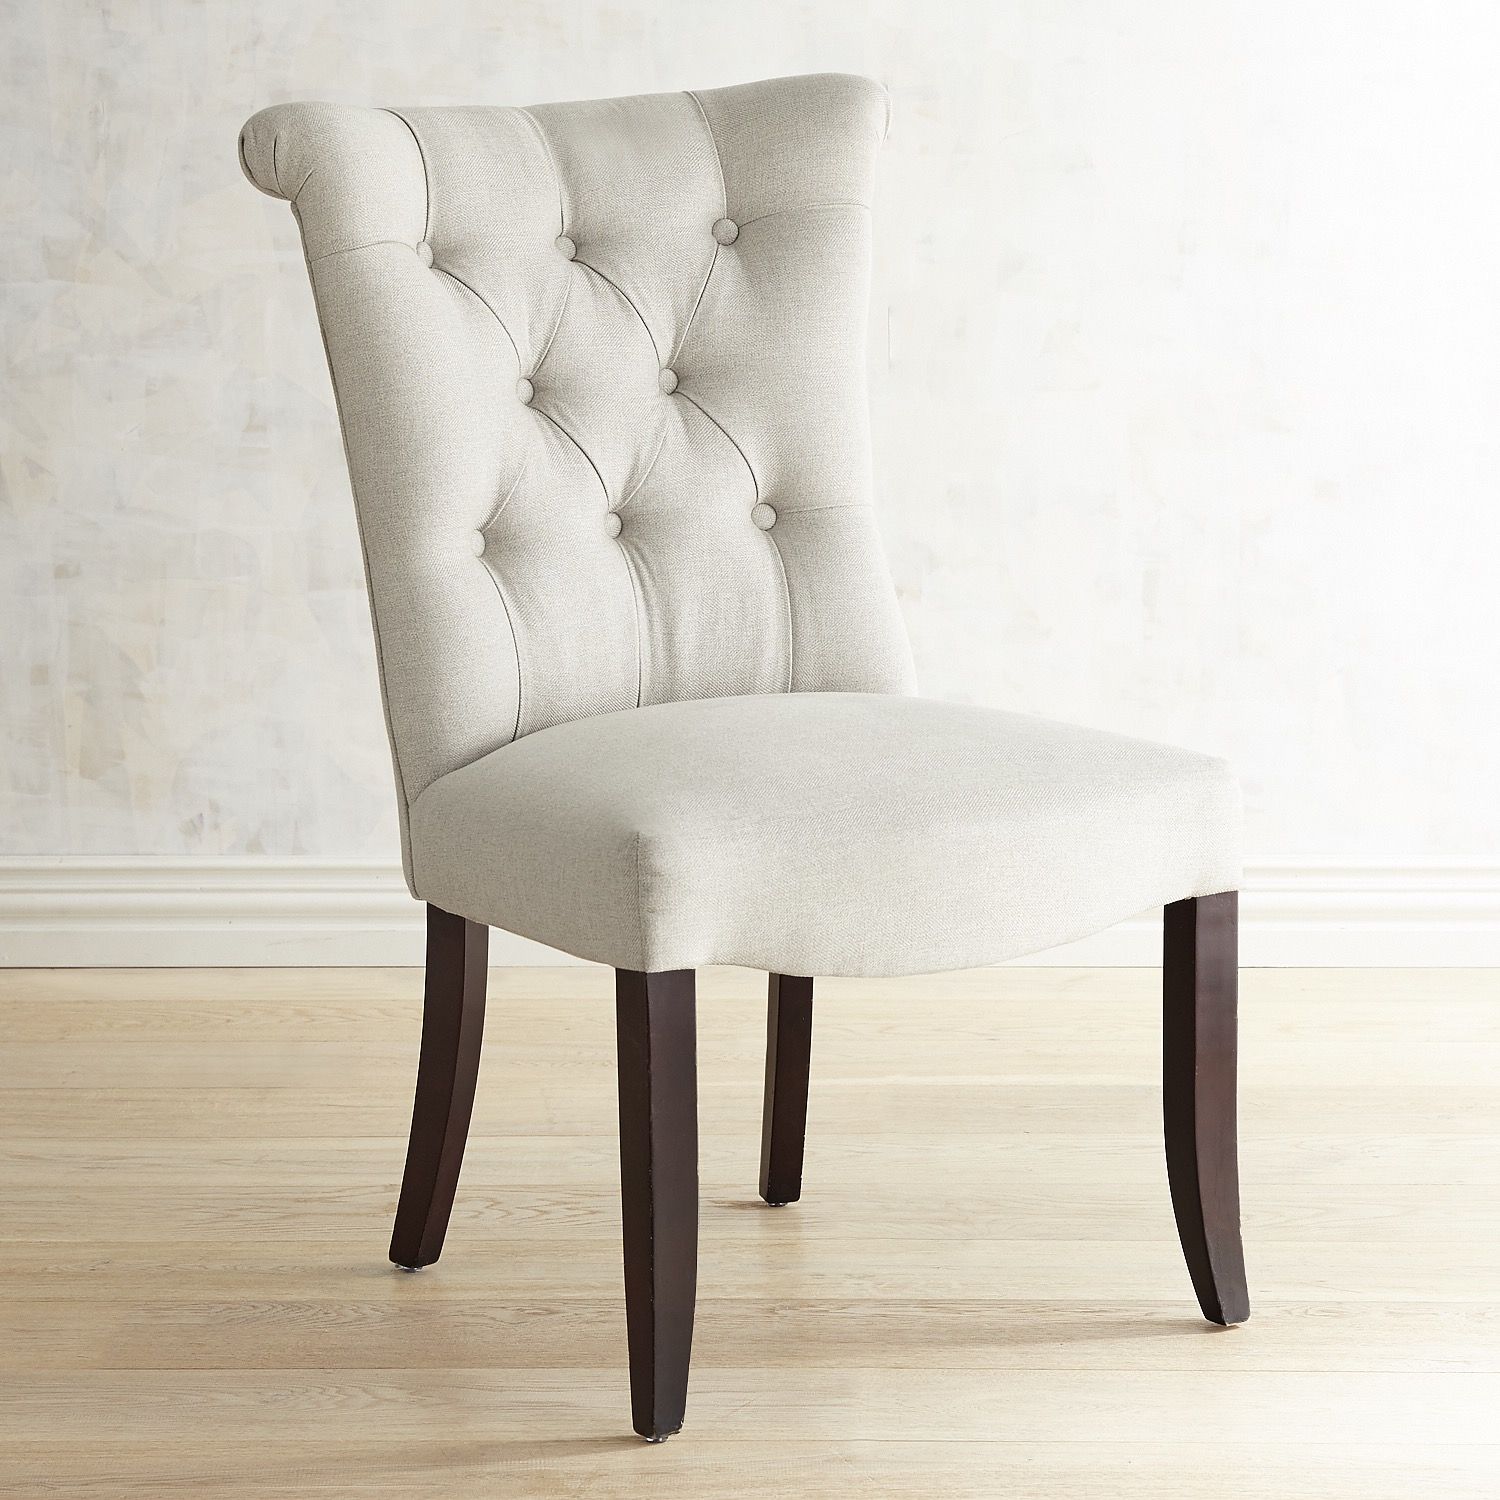 Colette Flax Dining Chair with Espresso Legs | Pier 1 Imports